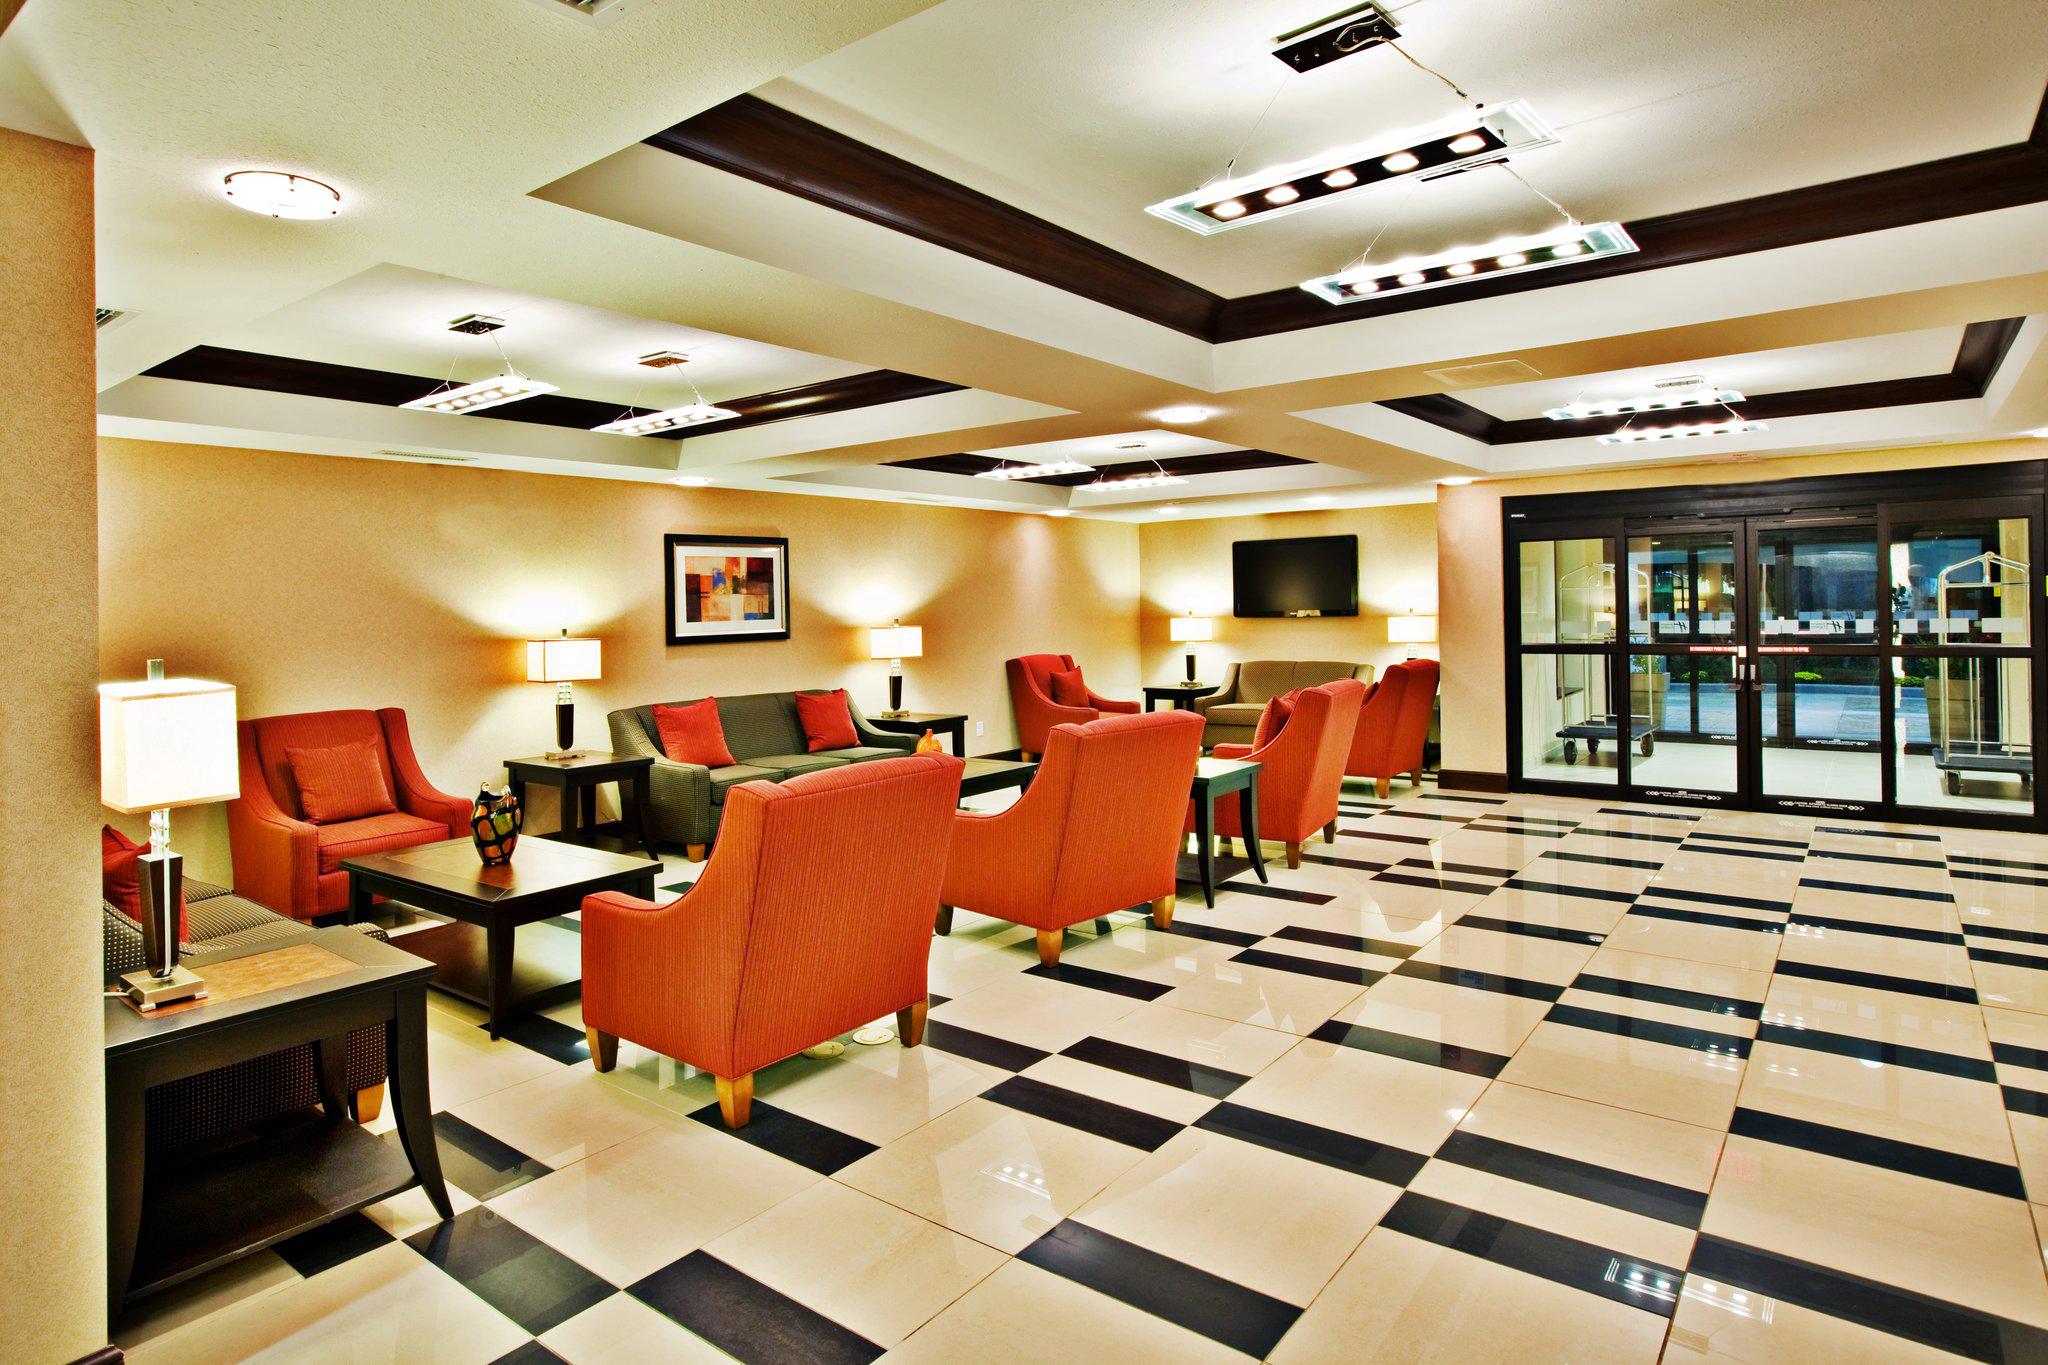 Holiday Inn Express & Suites Crawfordsville Photo